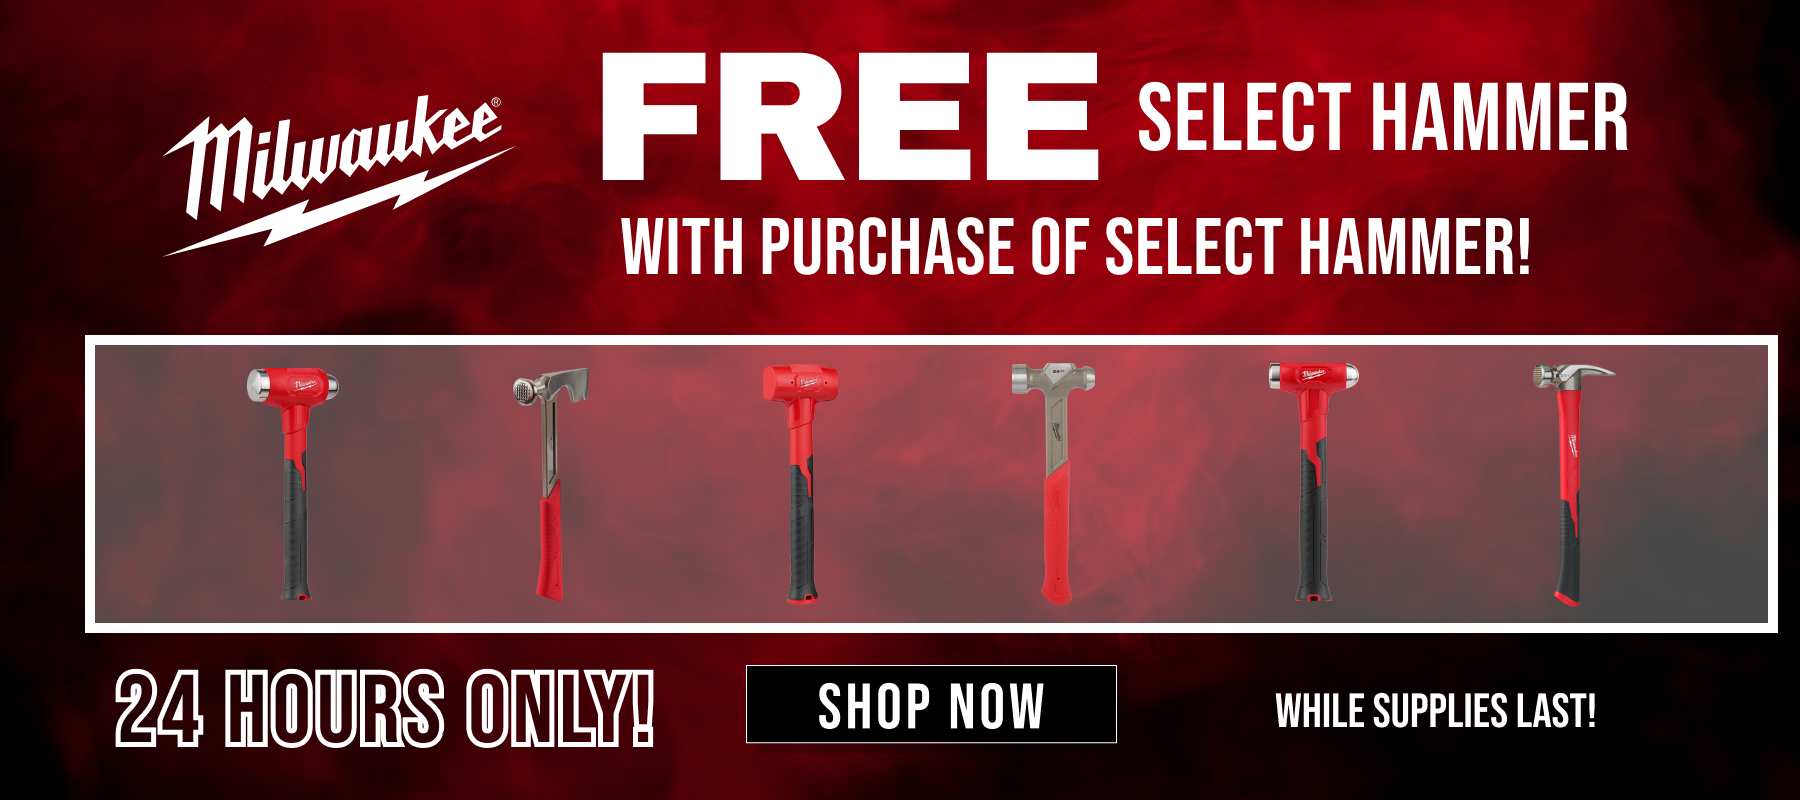 Milwaukee // Free Select Hammer with Purchase of Select Hammer // 24 Hours Only! // While Supplies Last! // SHOP NOW